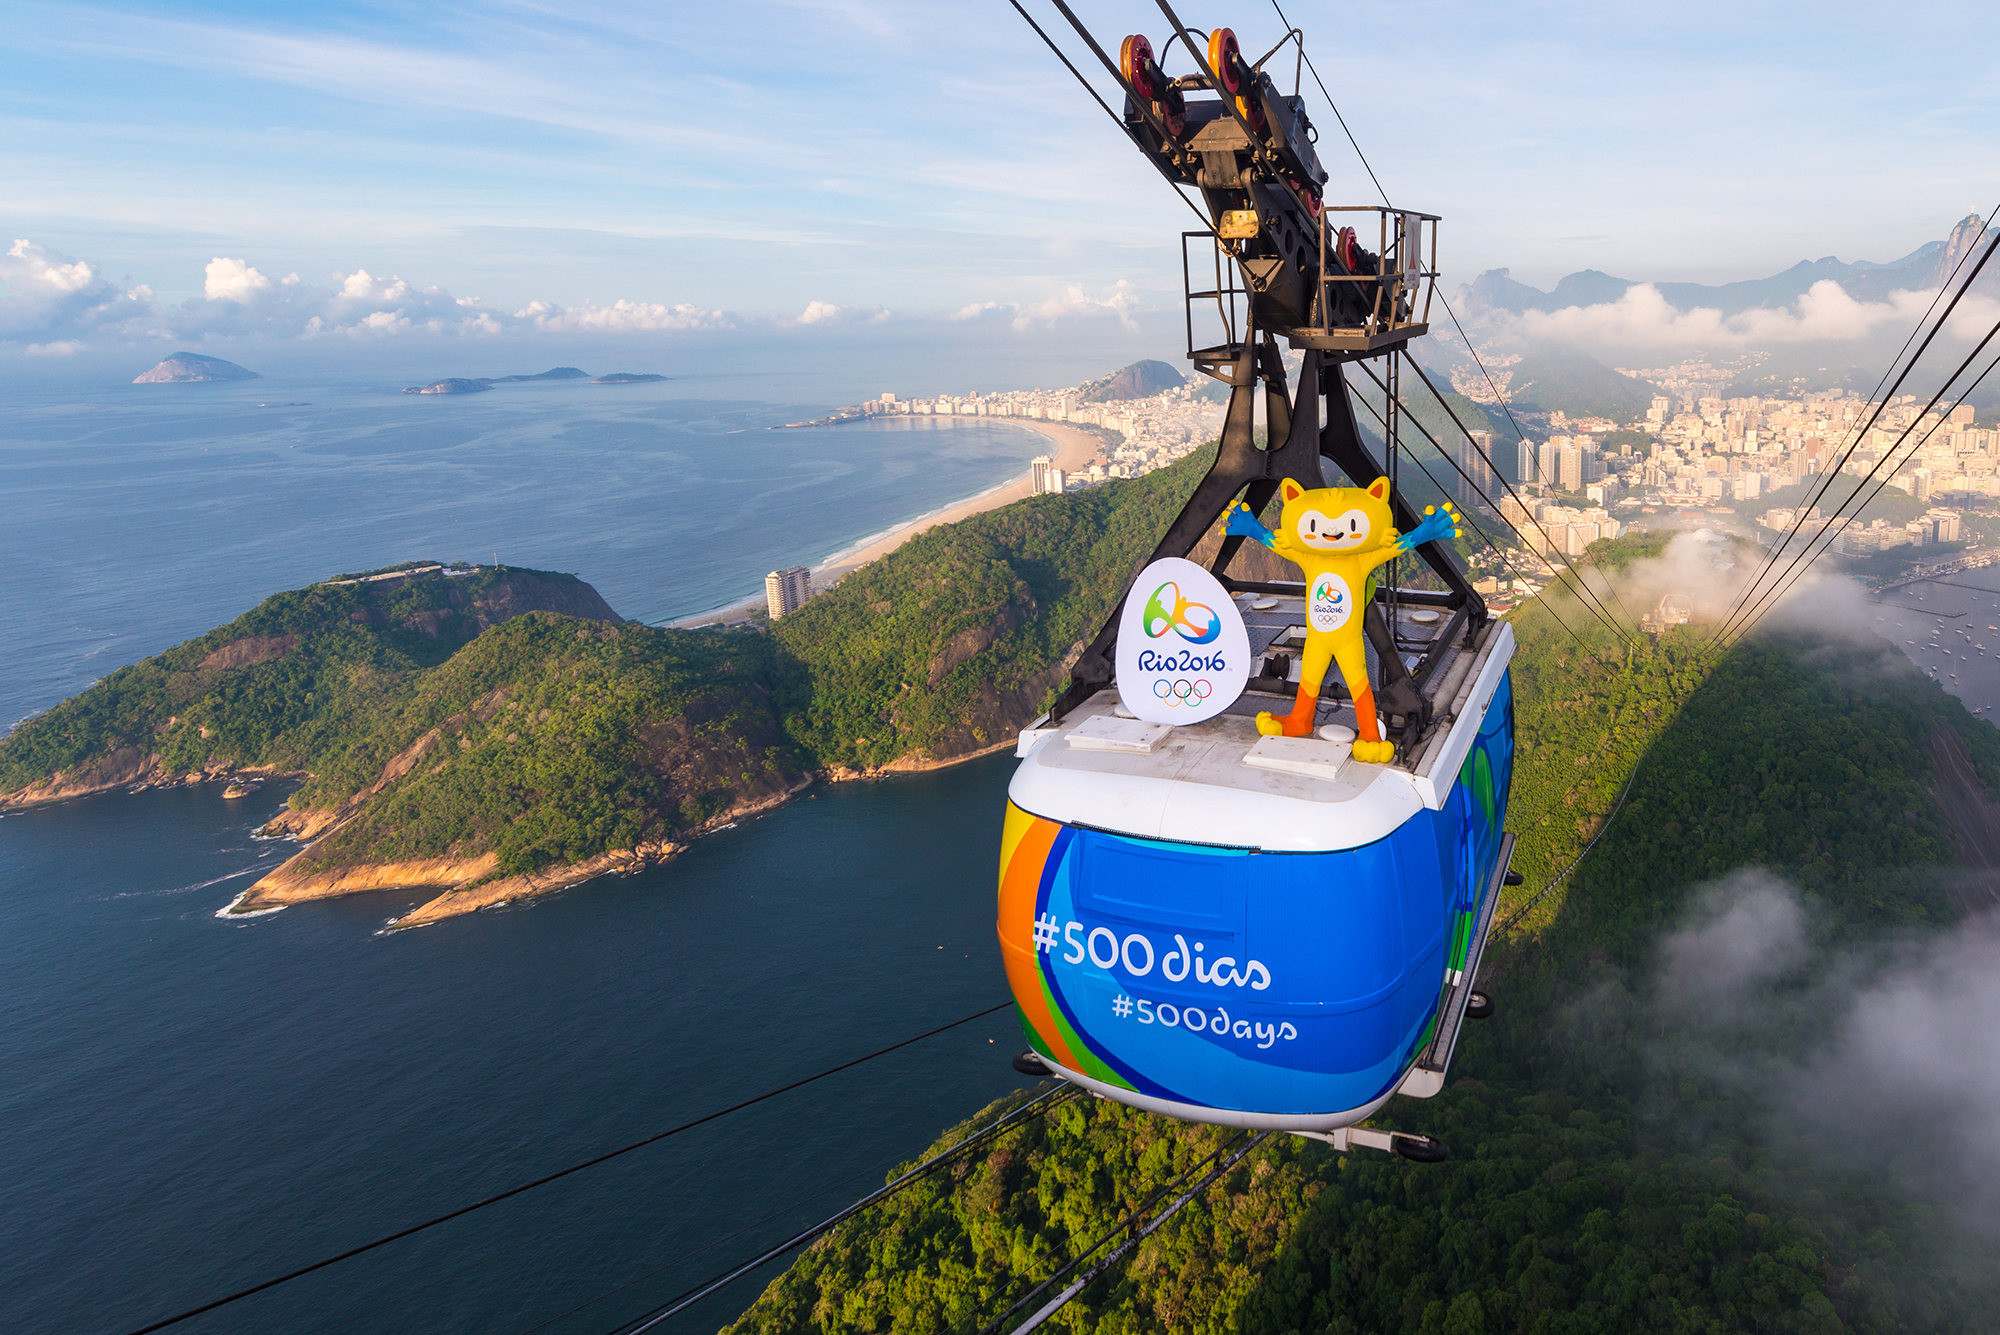 RIO DE JANEIRO, BRAZIL - MARCH 23: In this handout image provided by Rio 2016, Olympic mascot, Vinicius, rides from the top of the Sugarloaf cable on March 23, 2015 in Rio De Janeiro, Brazil. Rio de Janeiro celebrates 500 days to go until the Rio 2016 Olympic Games, the first to be staged in South America (Photo by Alex Ferro/Rio 2016 via Getty Images)